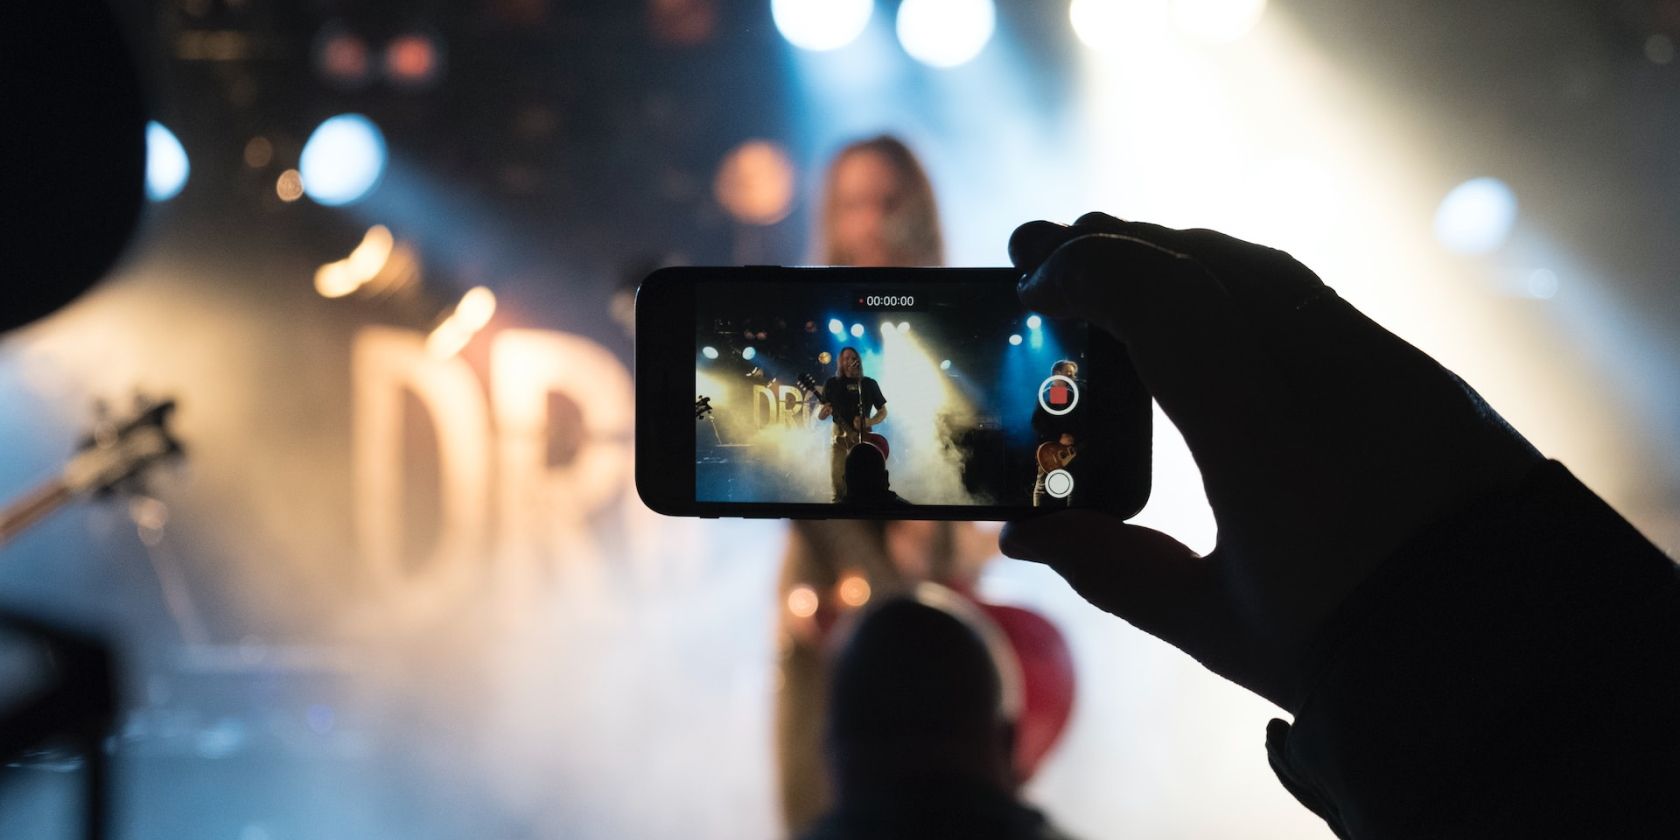 Recording a concert using iPhone